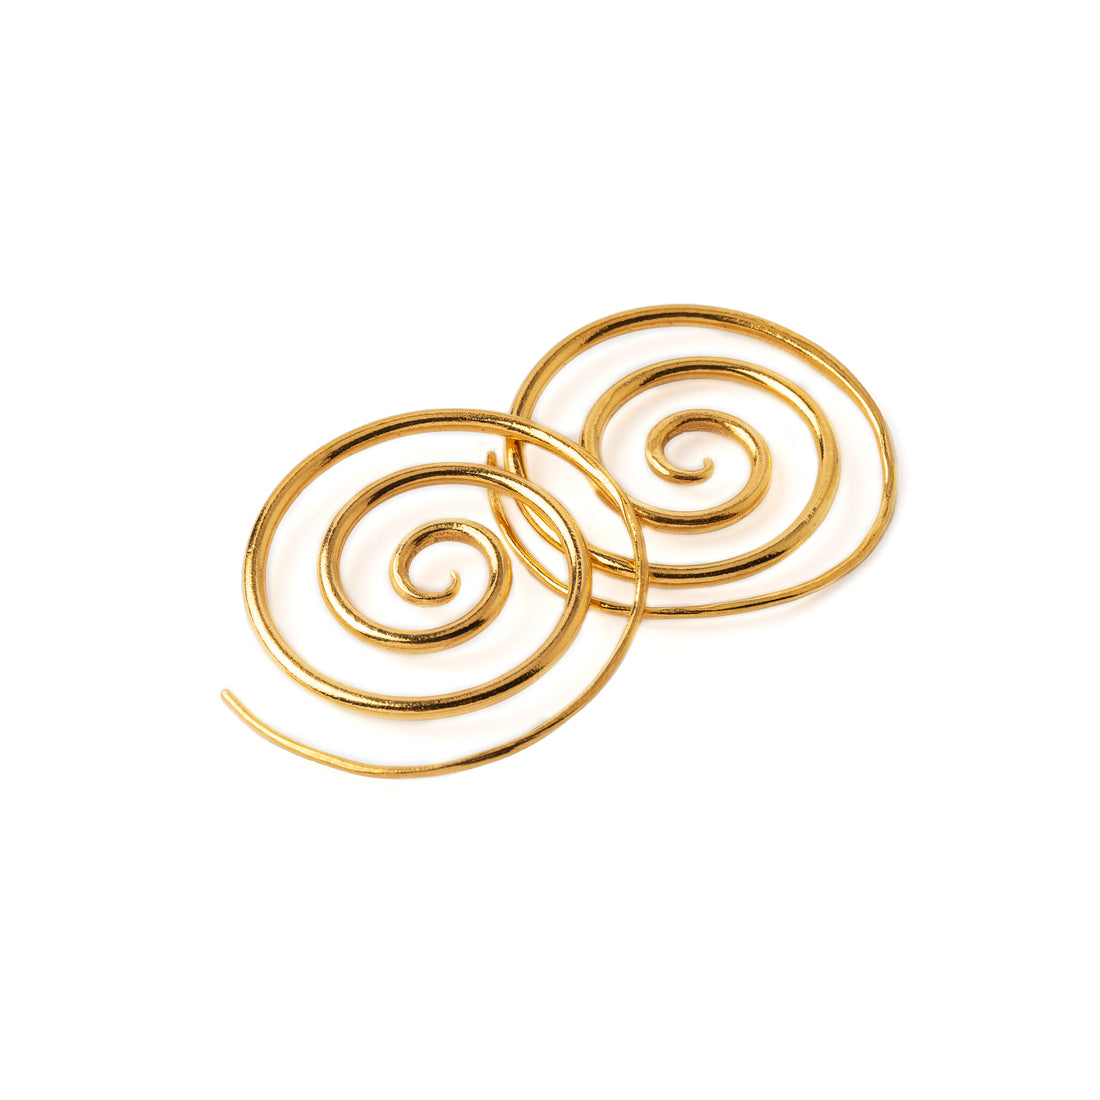 Super Spiral Gold Earrings front and side view